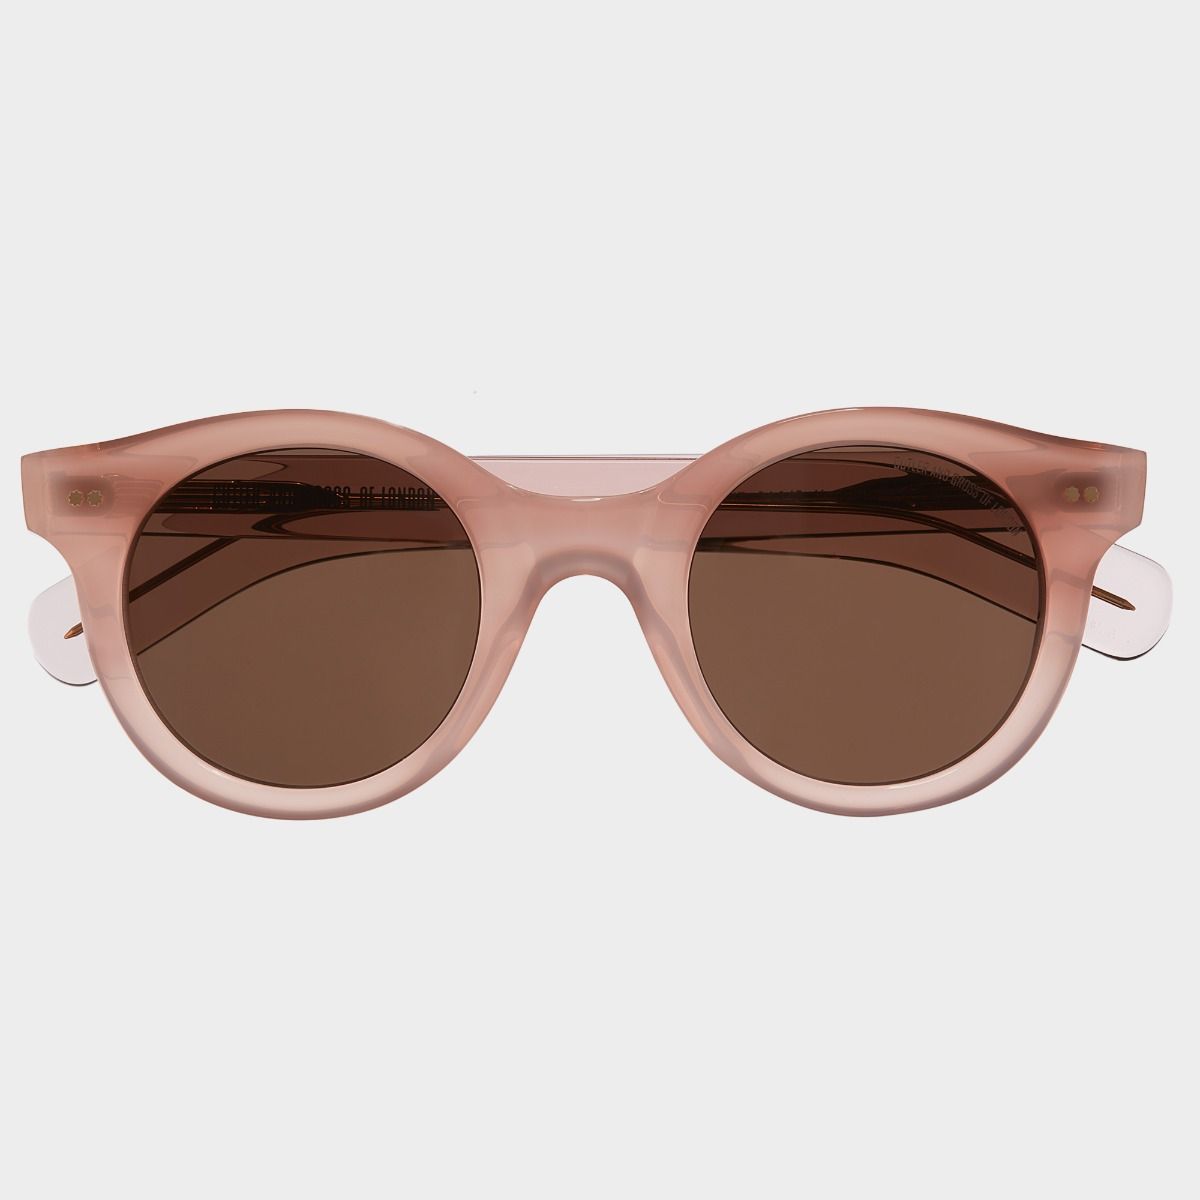 Cutler and Gross, 1390 Round Sunglasses - Shell Pink